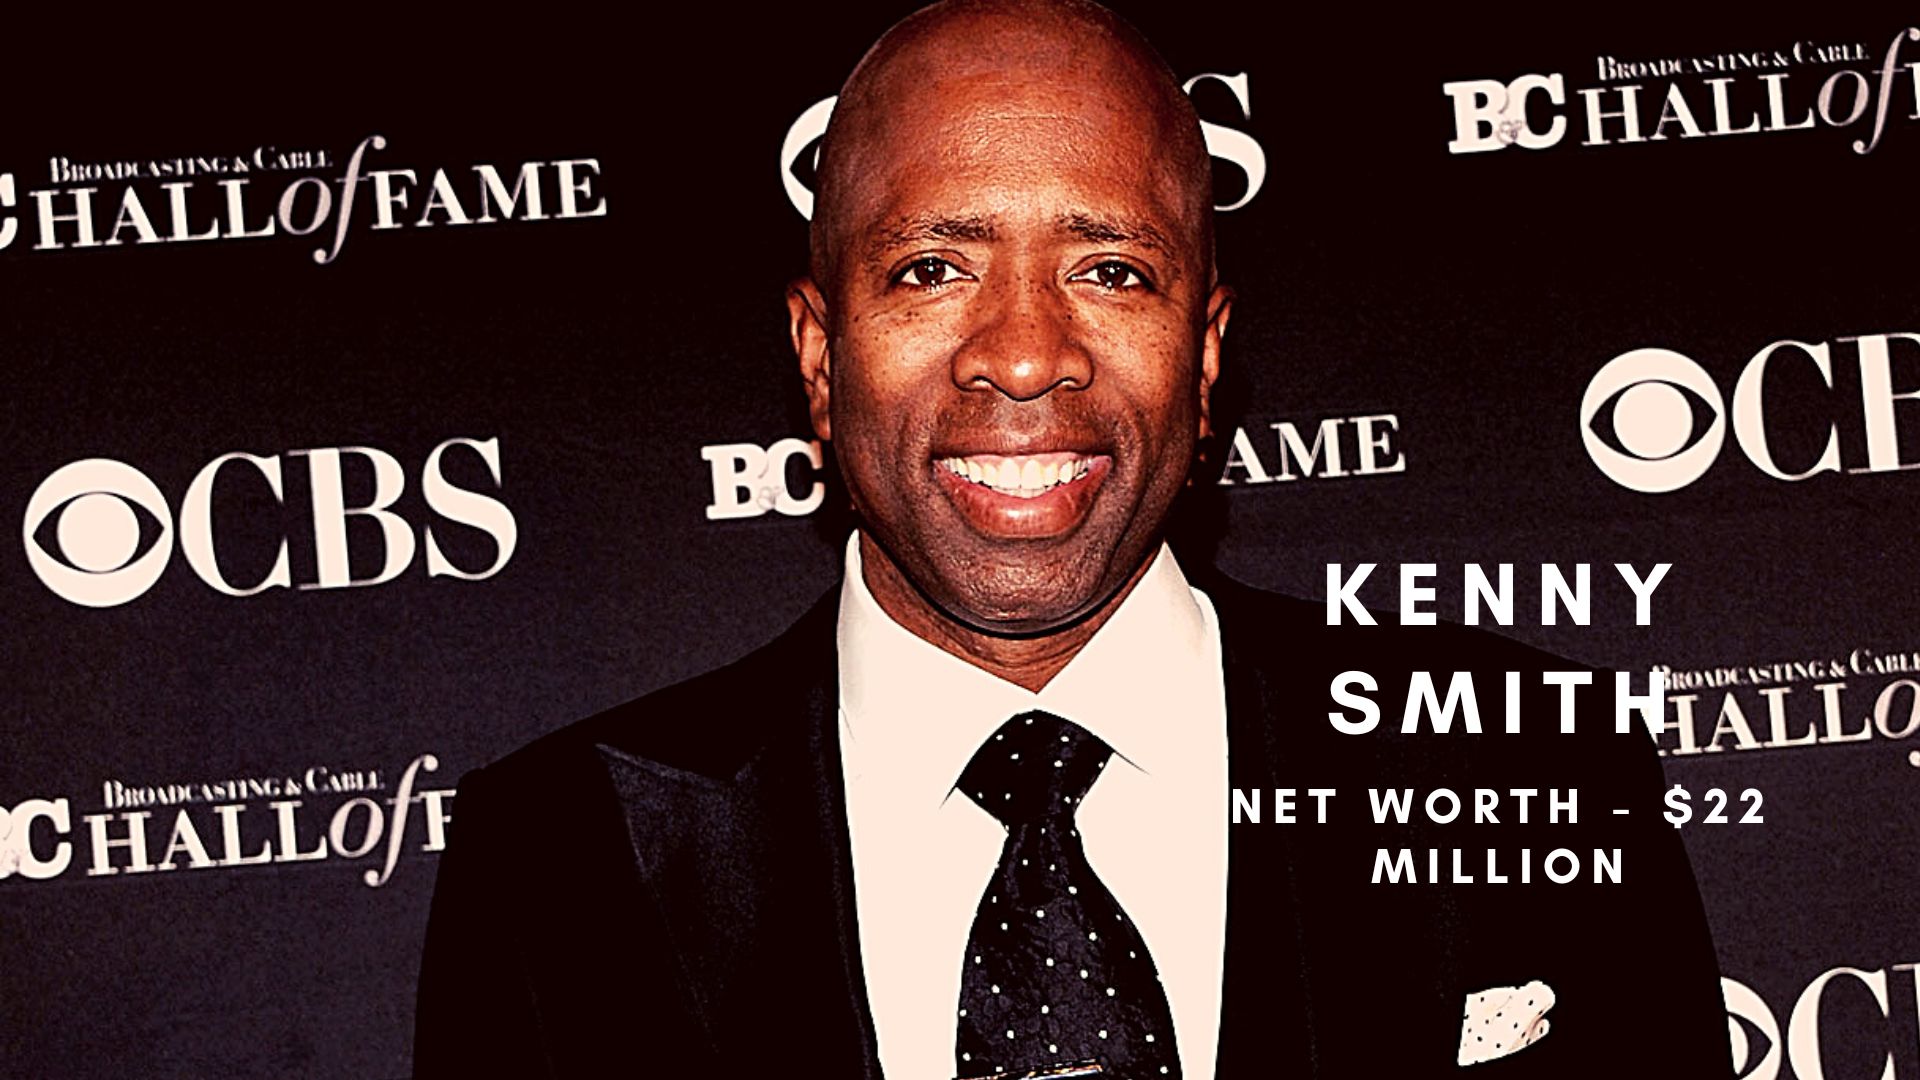 Kenny Smith's Net Woth: The Wealth of a Basketball Superstar